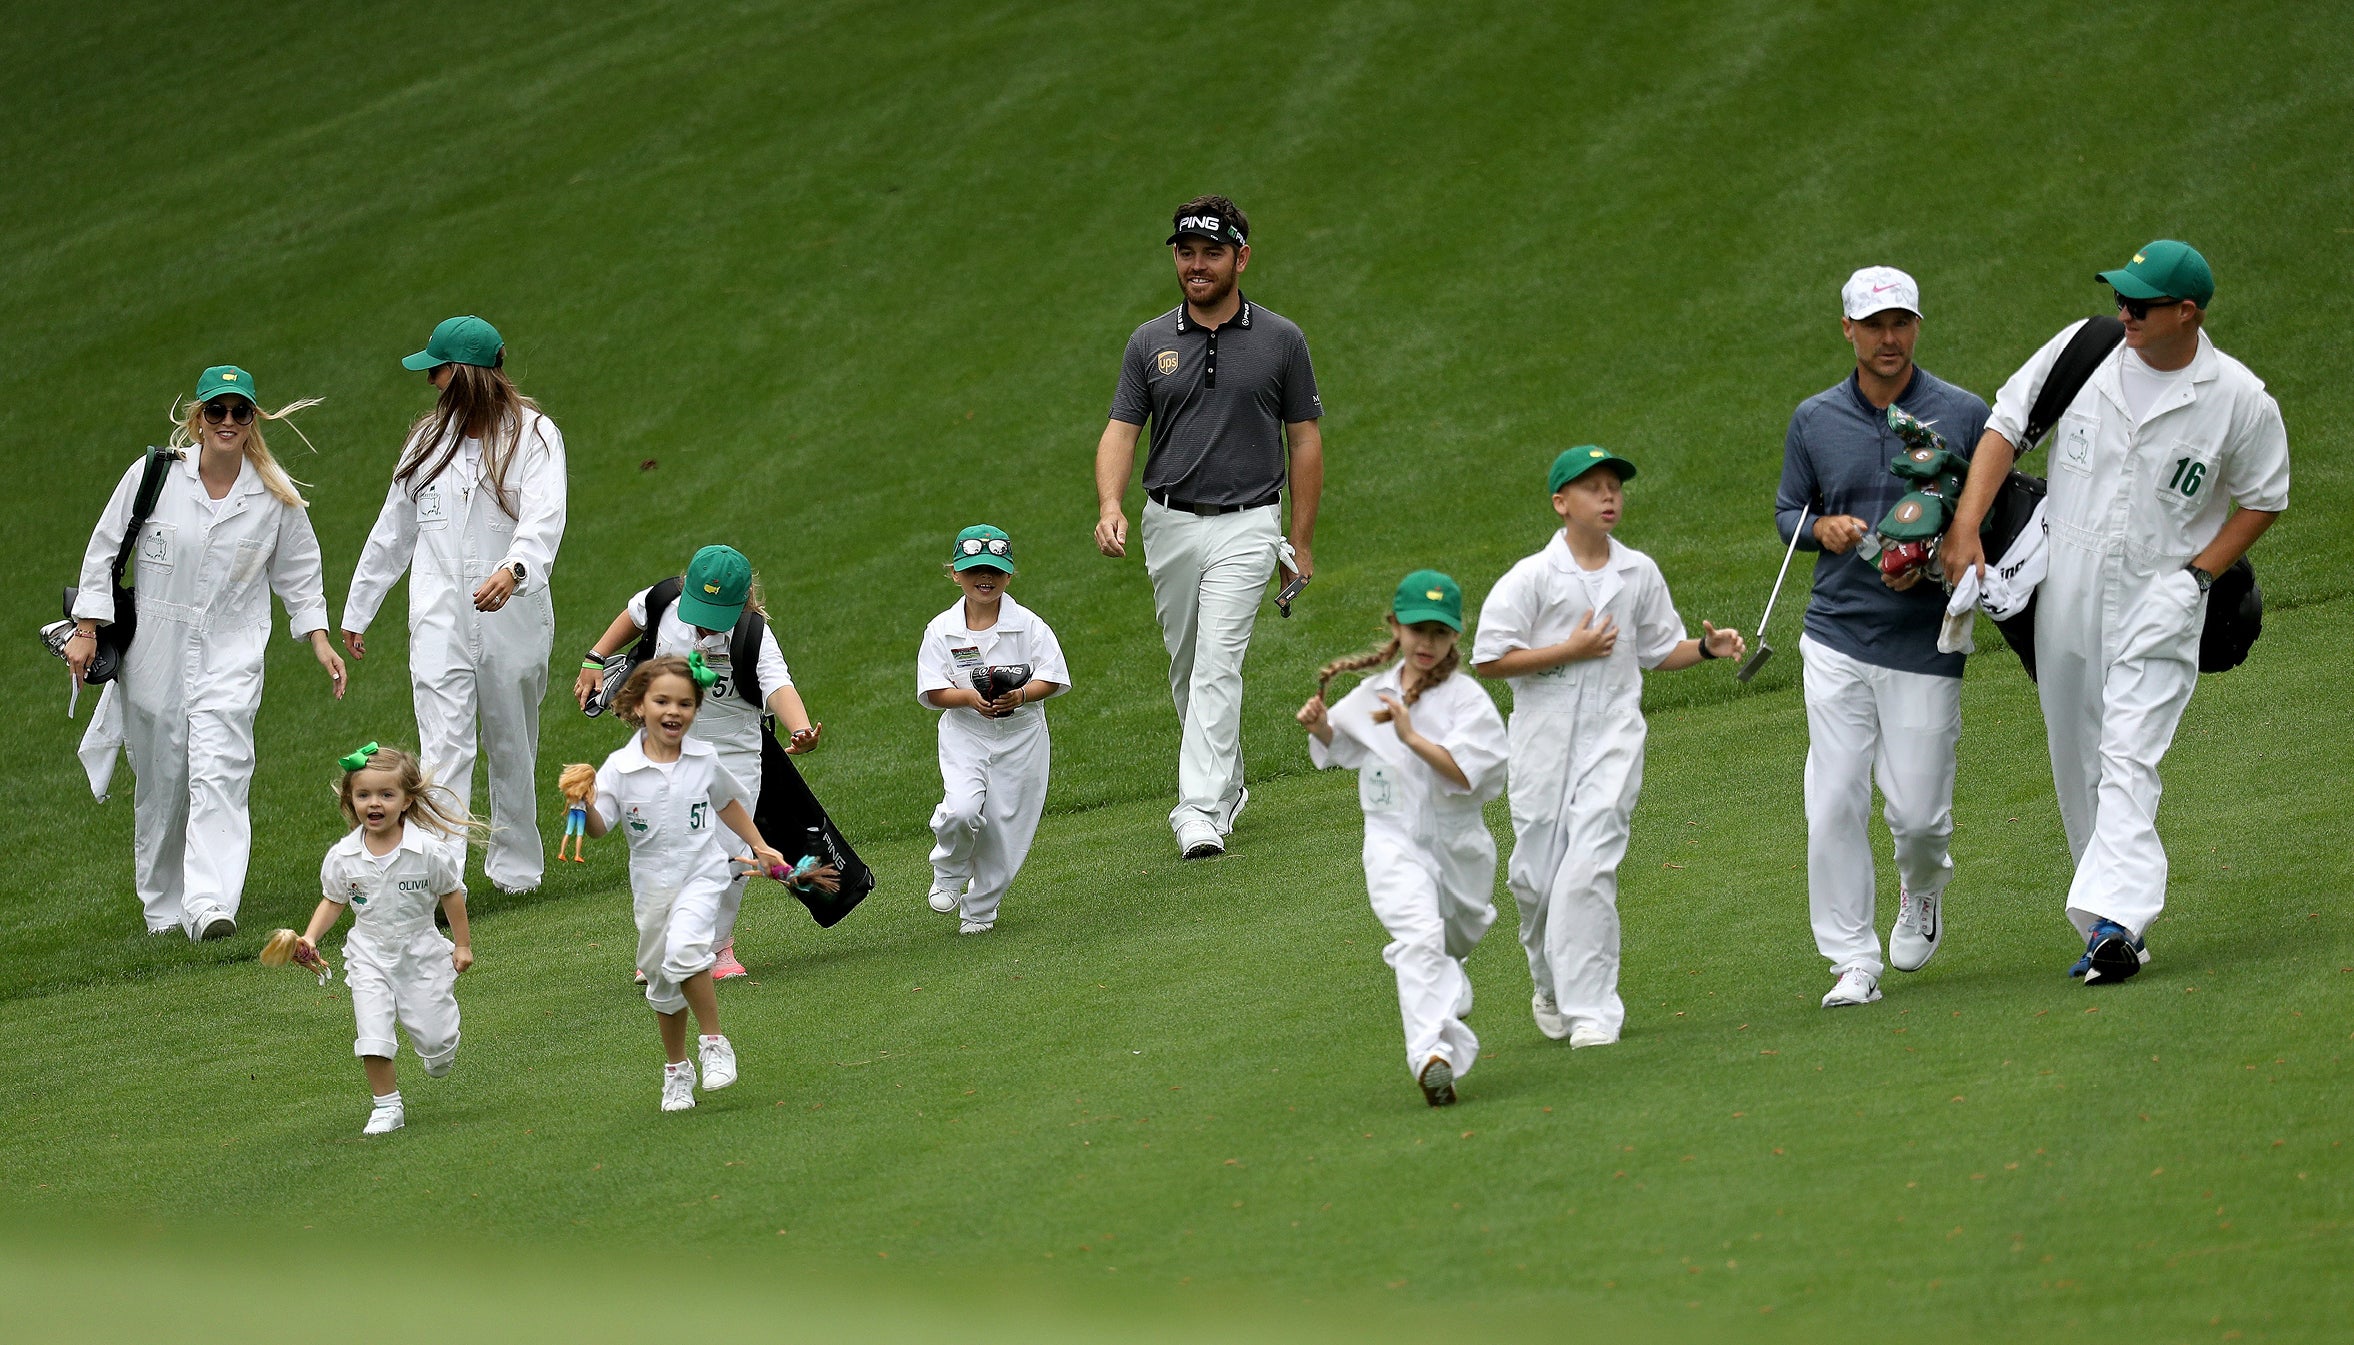 Those iconic Masters caddie uniforms? Here's how to buy one